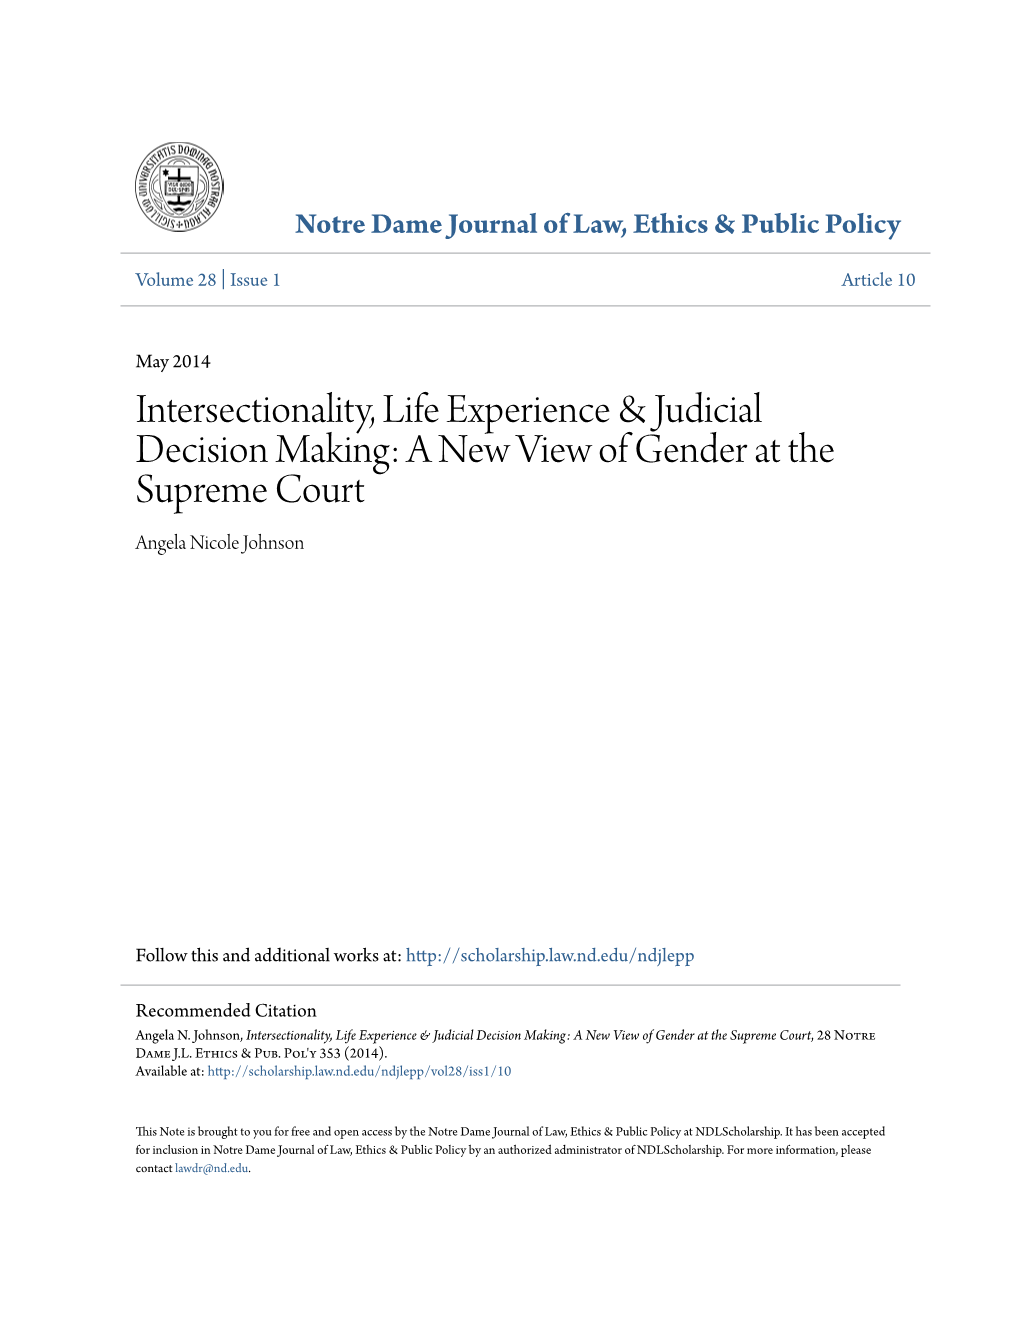 Intersectionality, Life Experience & Judicial Decision Making